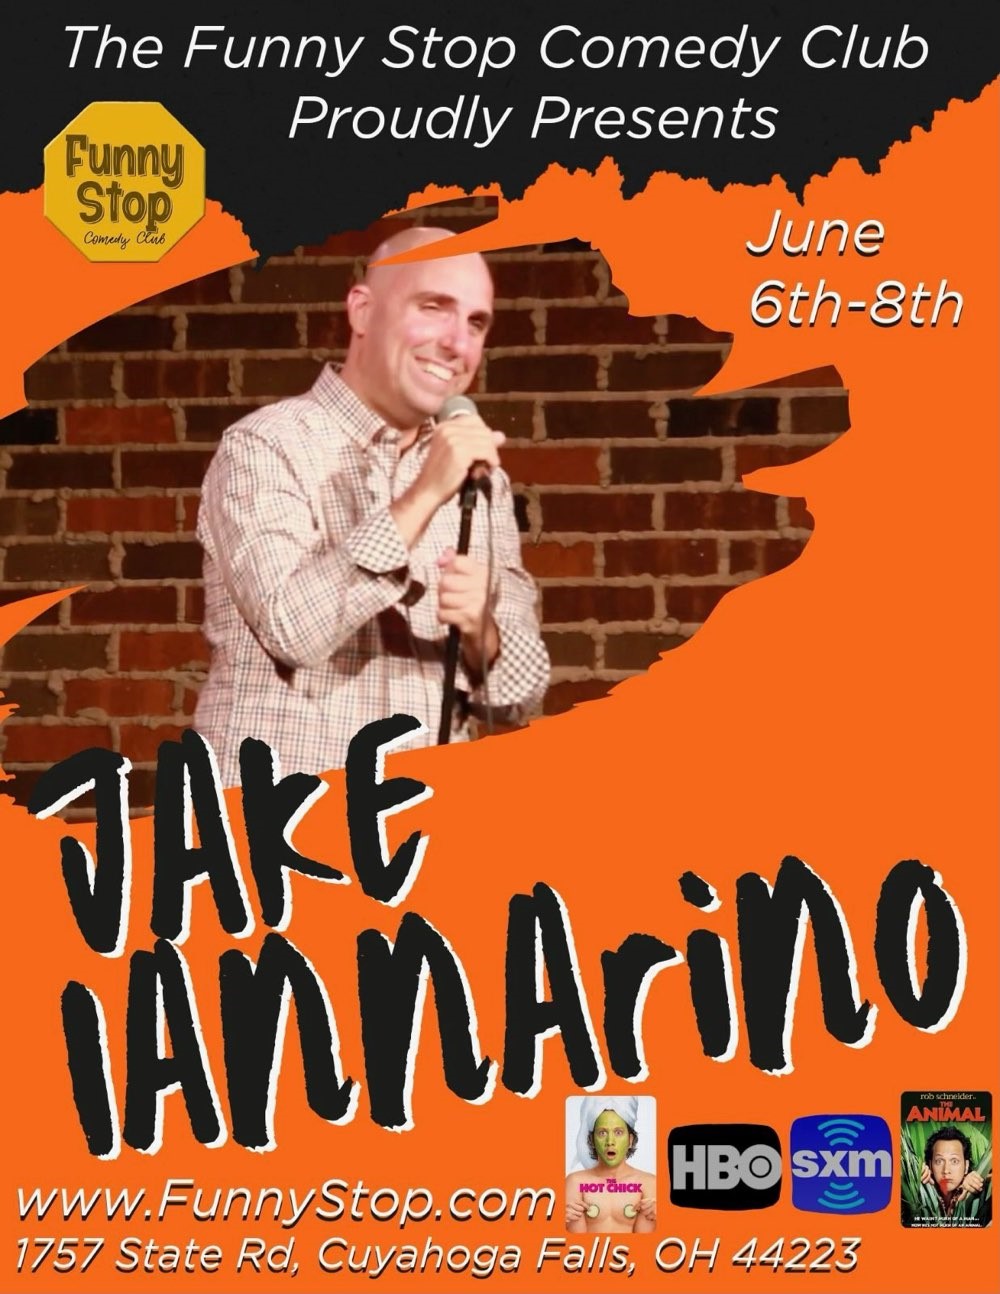 Jake Iannarino - Thur. 8PM Show Funny Stop Comedy Club on juin 06, 20:00@Funny Stop Comedy Club - Achetez des billets et obtenez des informations surFunny Stop funnystop.online